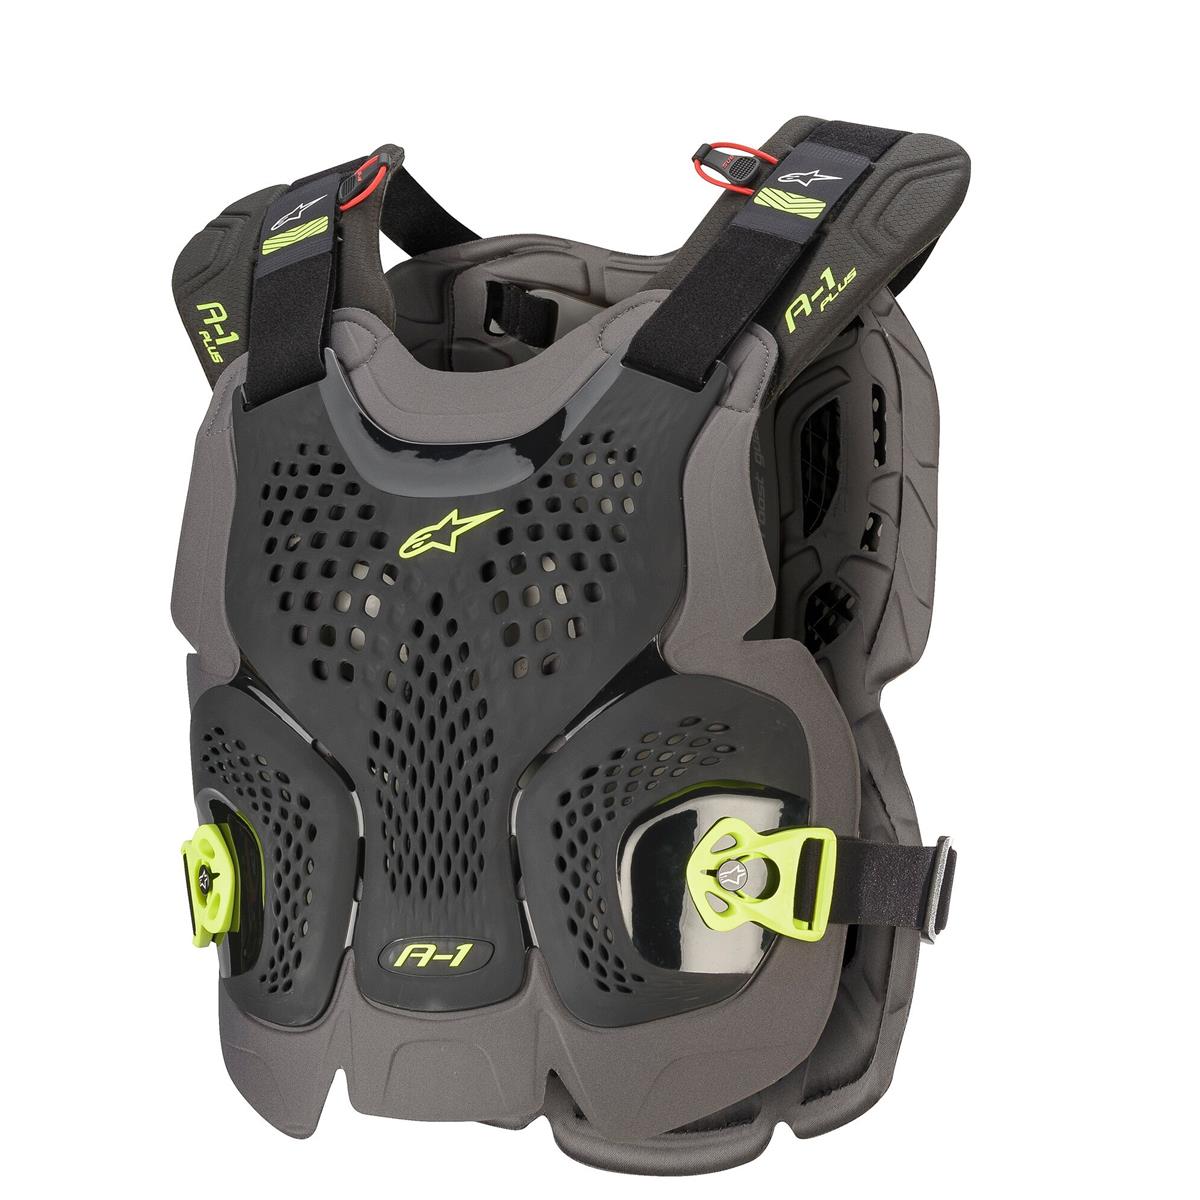 Alpinestars Chest Protector A-1 Plus Black/Anthracite/Yellow Fluo